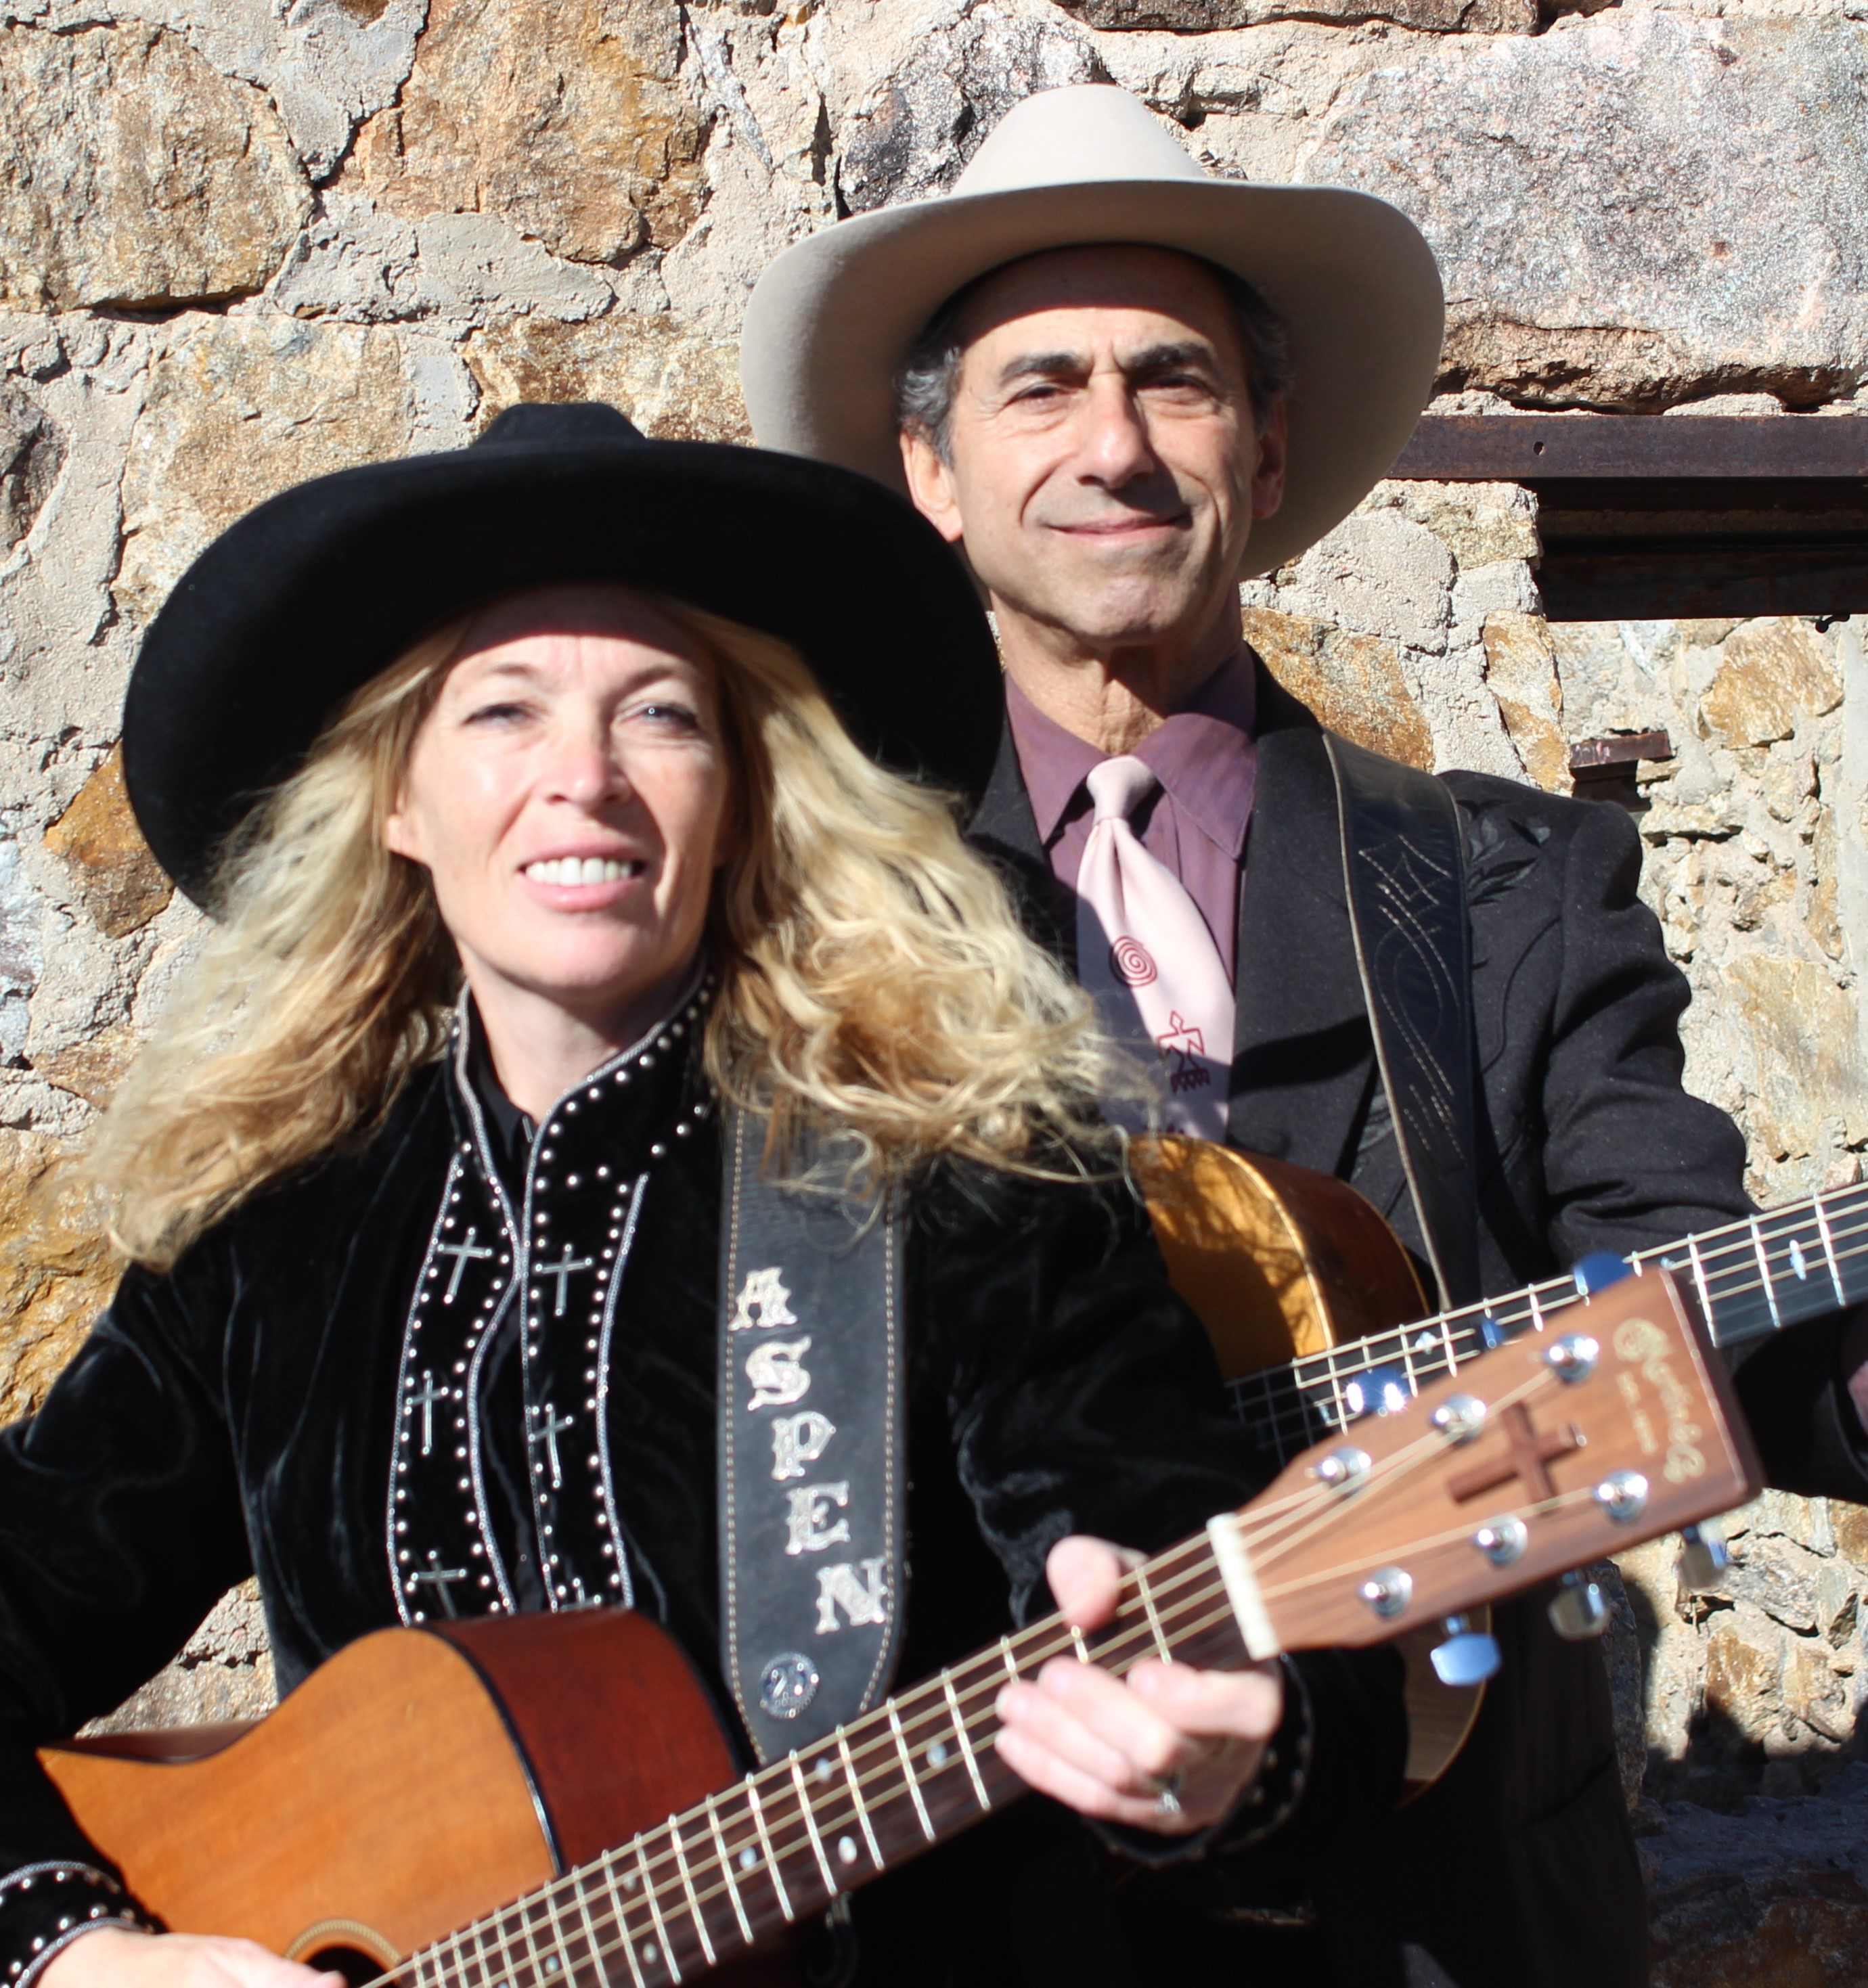 Kerry Grombacher & Aspen Black Duo, presented by the Eiteljorg Museum of Native and Western Art and the Indy Folk Series. 